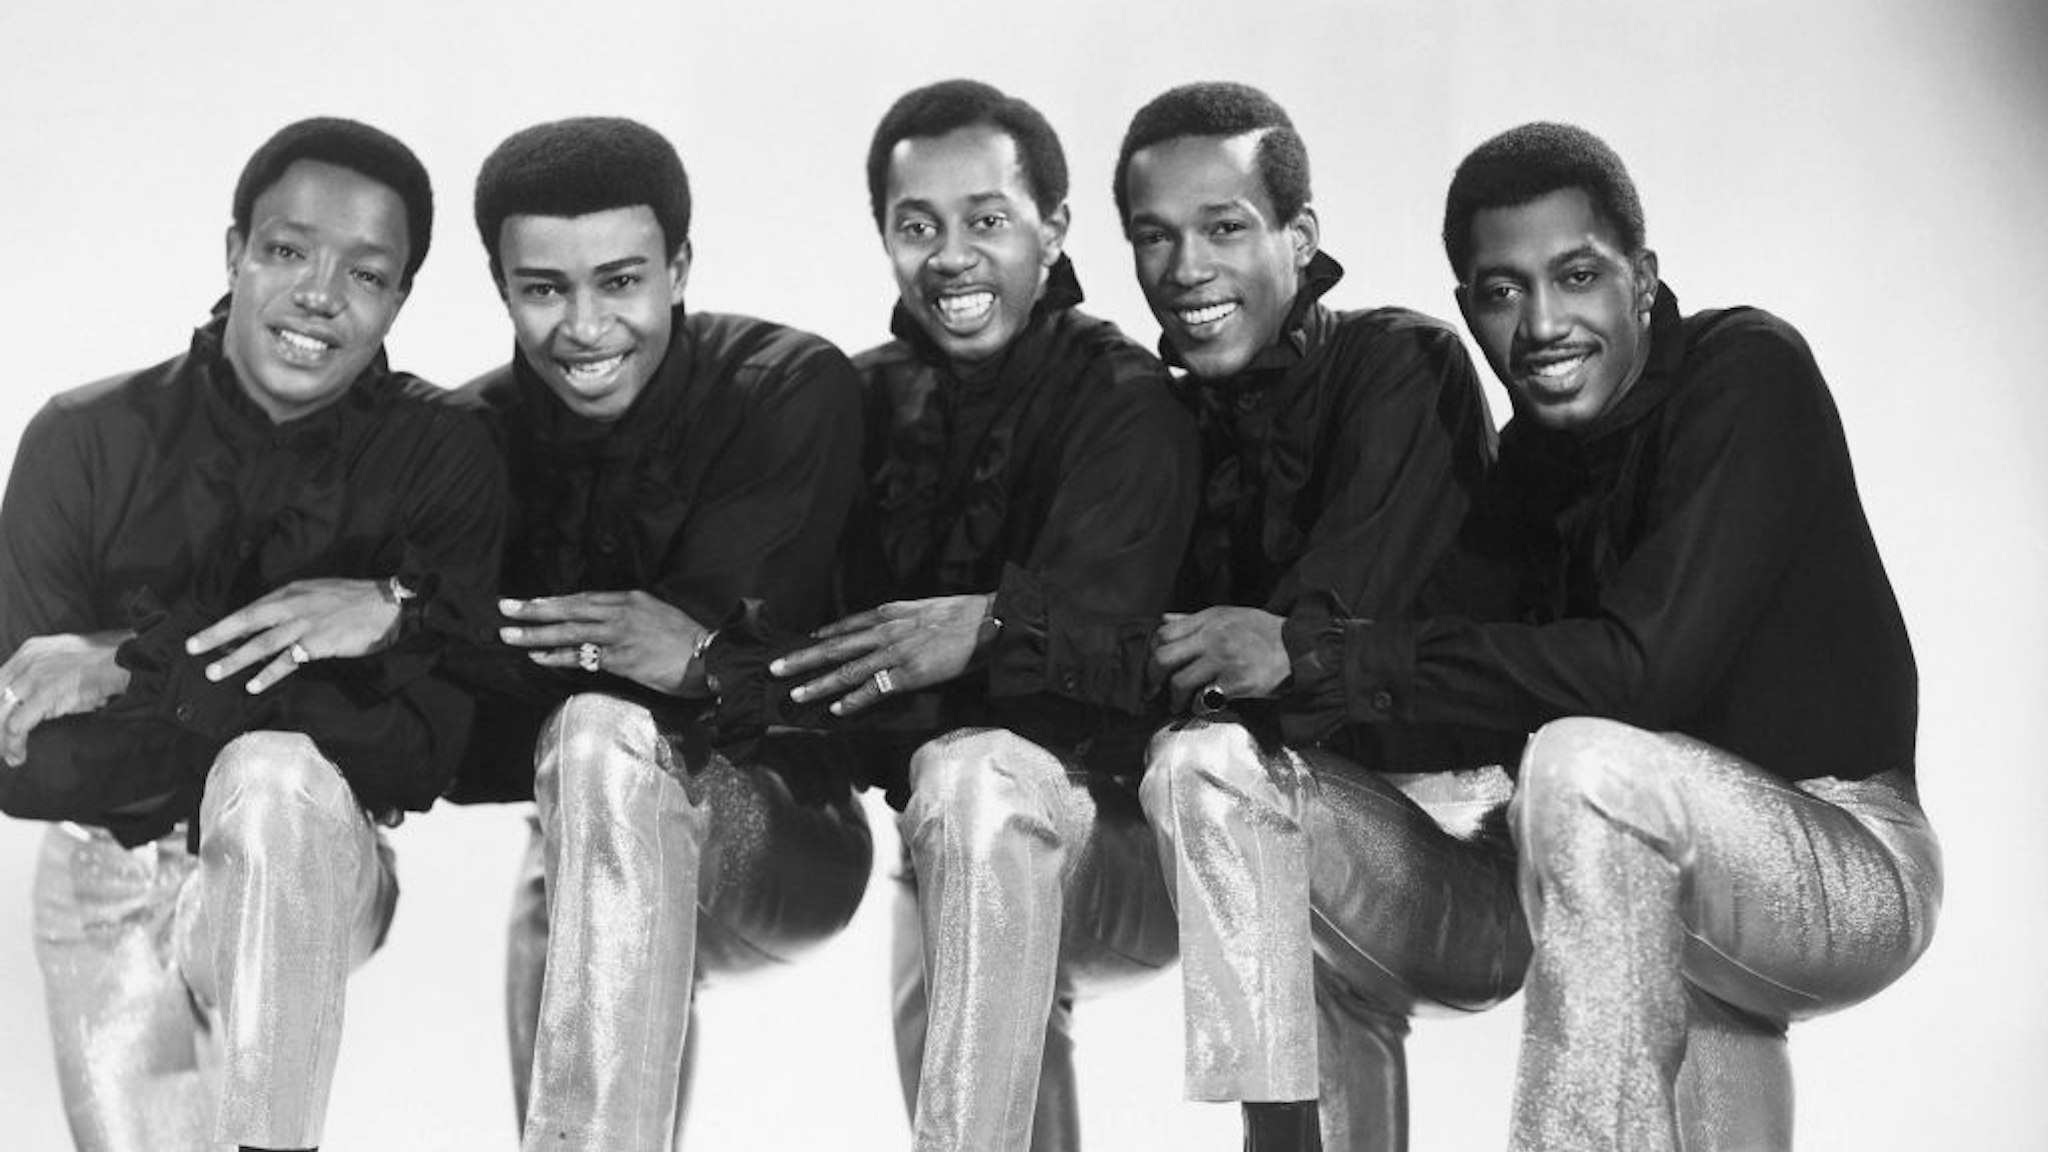 NEW YORK - 1965: L-R: Eddie Kendricks, Paul Williams, Melvin Franklin, David Ruffin and Otis Williams of the R&amp;B group "The Temptations" pose for a portrait in 1965 in New York City, New York. (Photo by Michael Ochs Archives/Getty Images)